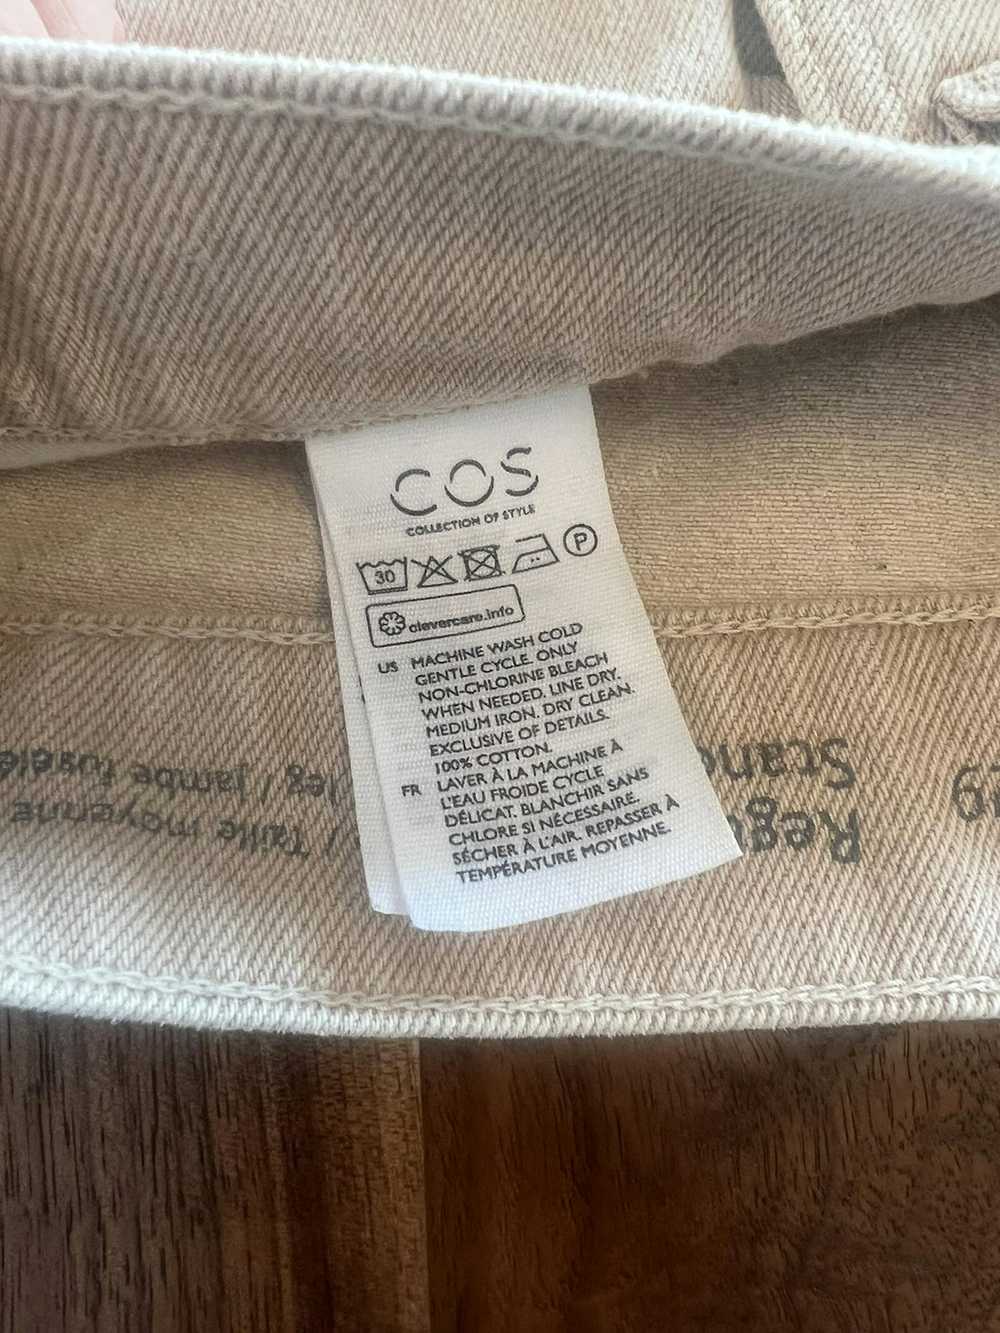 Cos COS - Regular / Standard Mid Rise Jeans - image 5